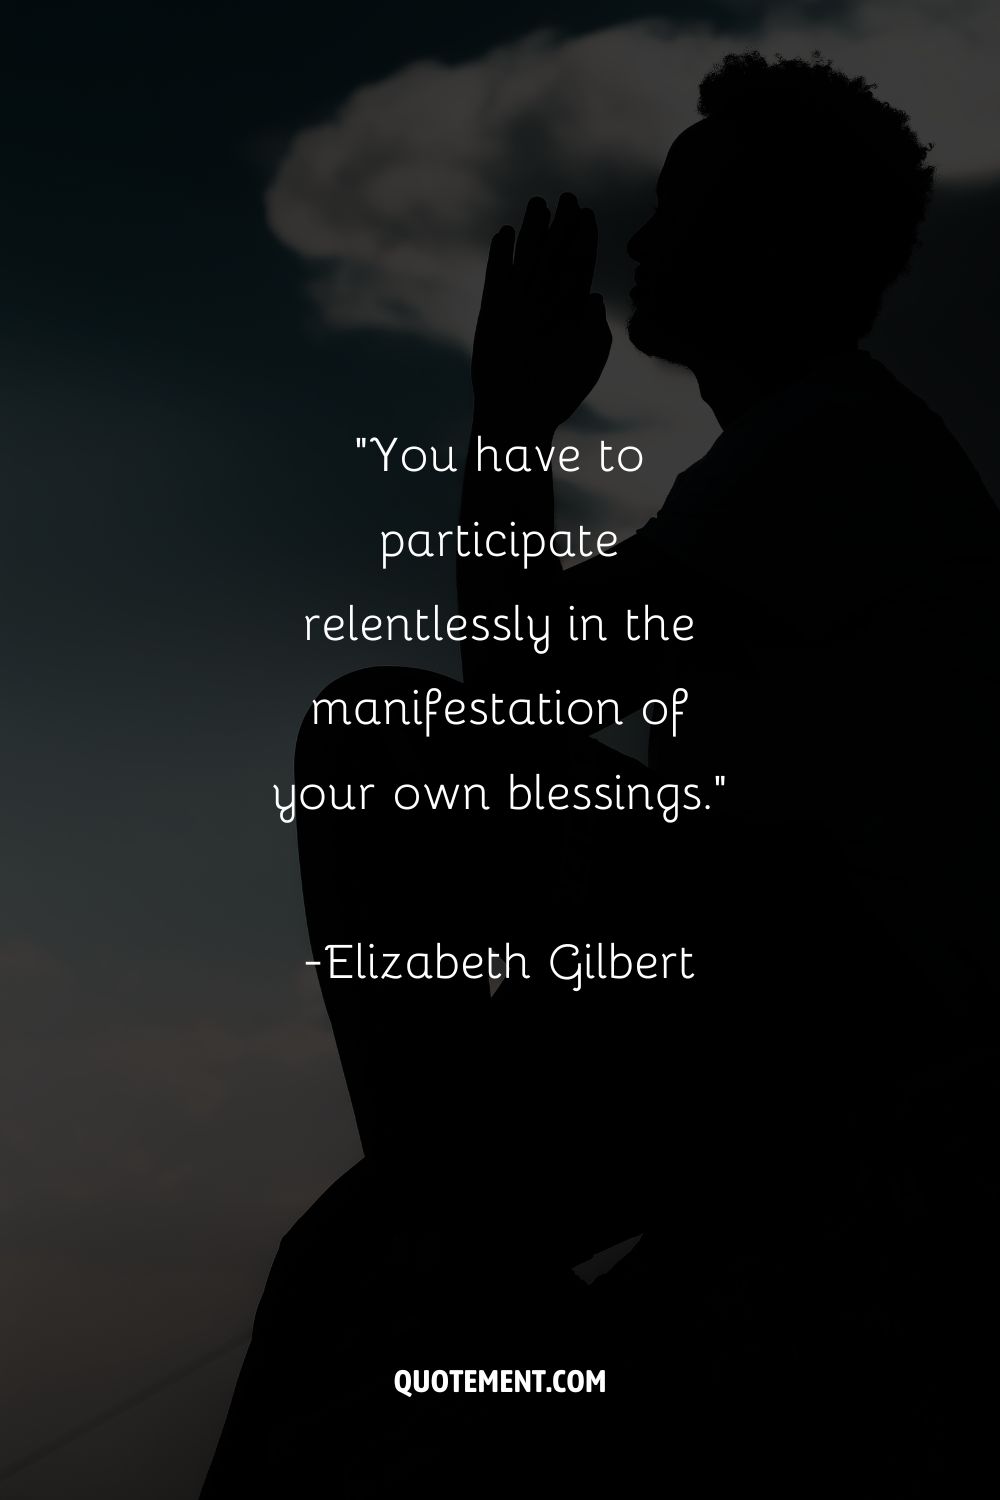 “You have to participate relentlessly in the manifestation of your own blessings.”